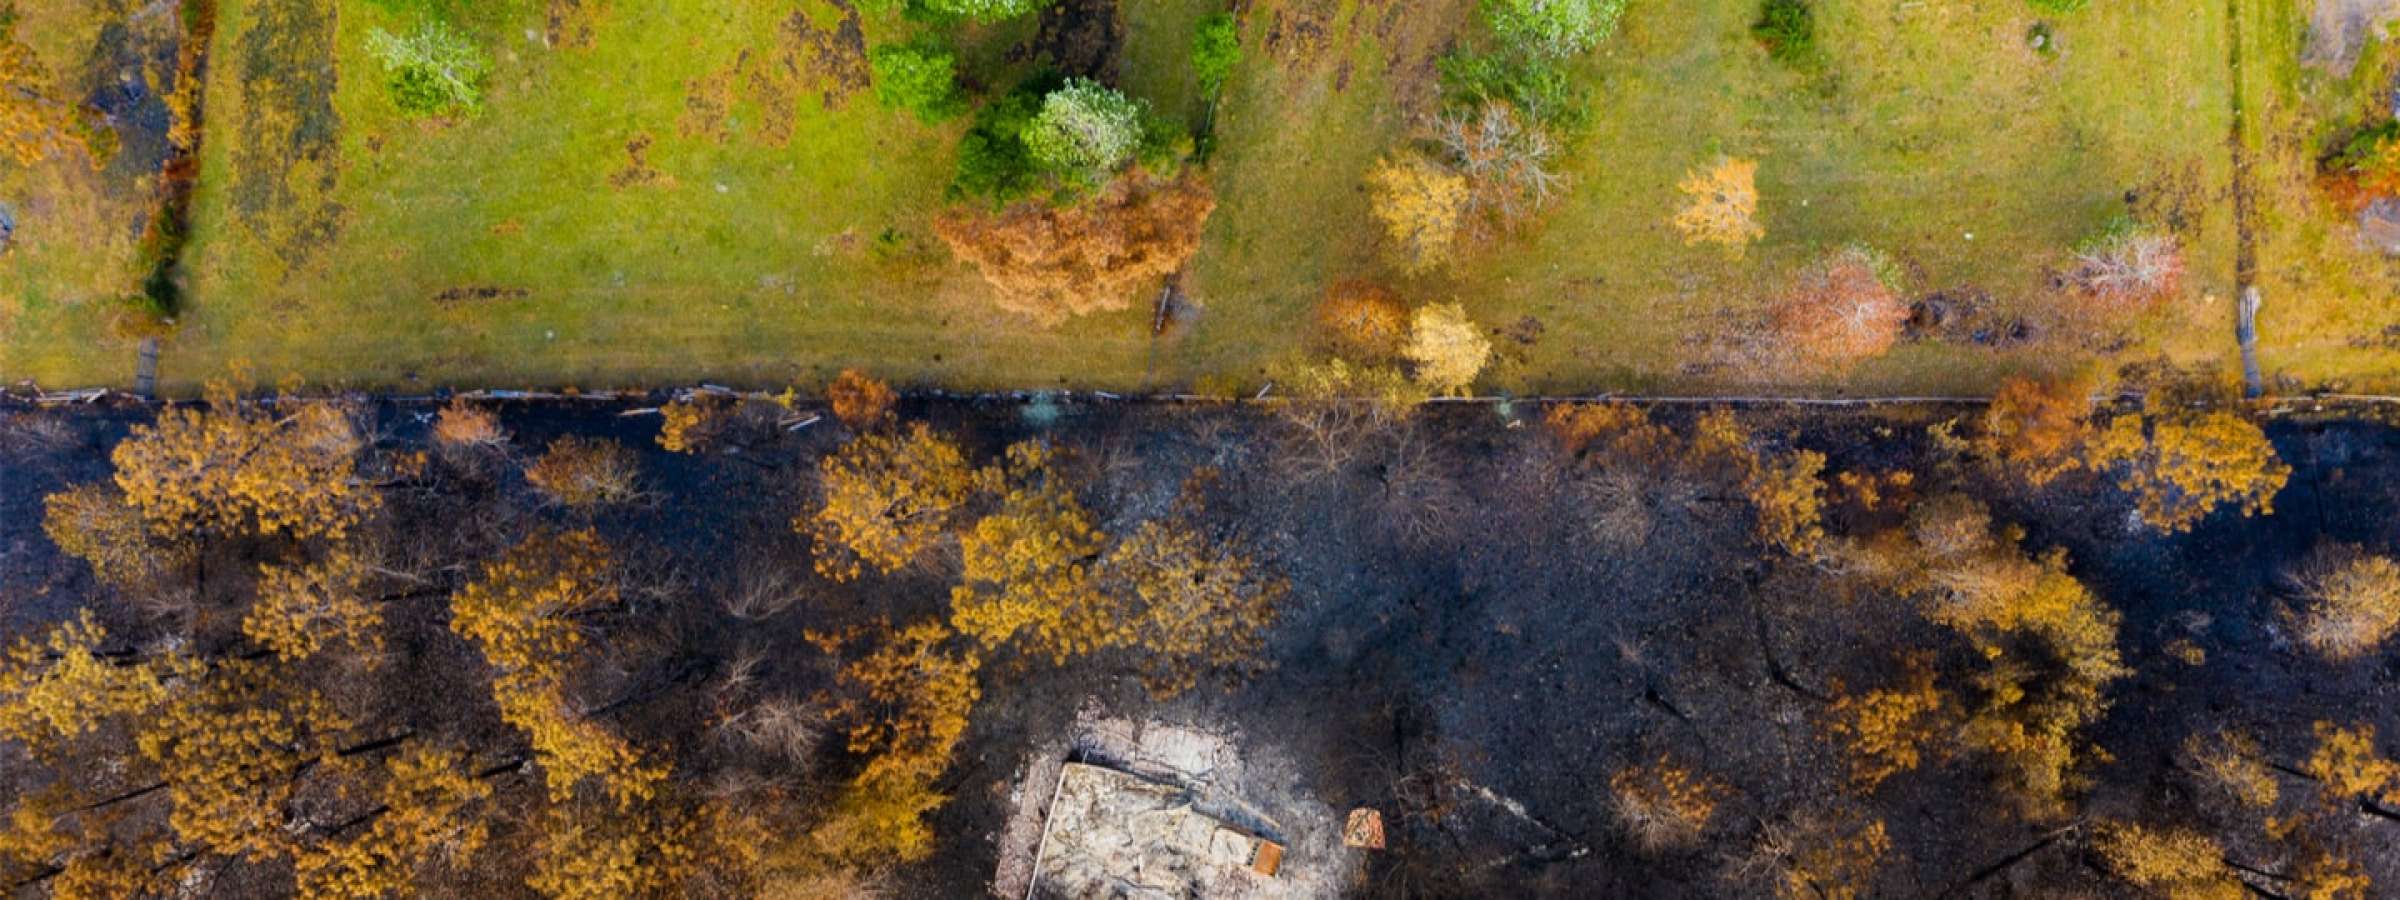 Aerial view of a burned area